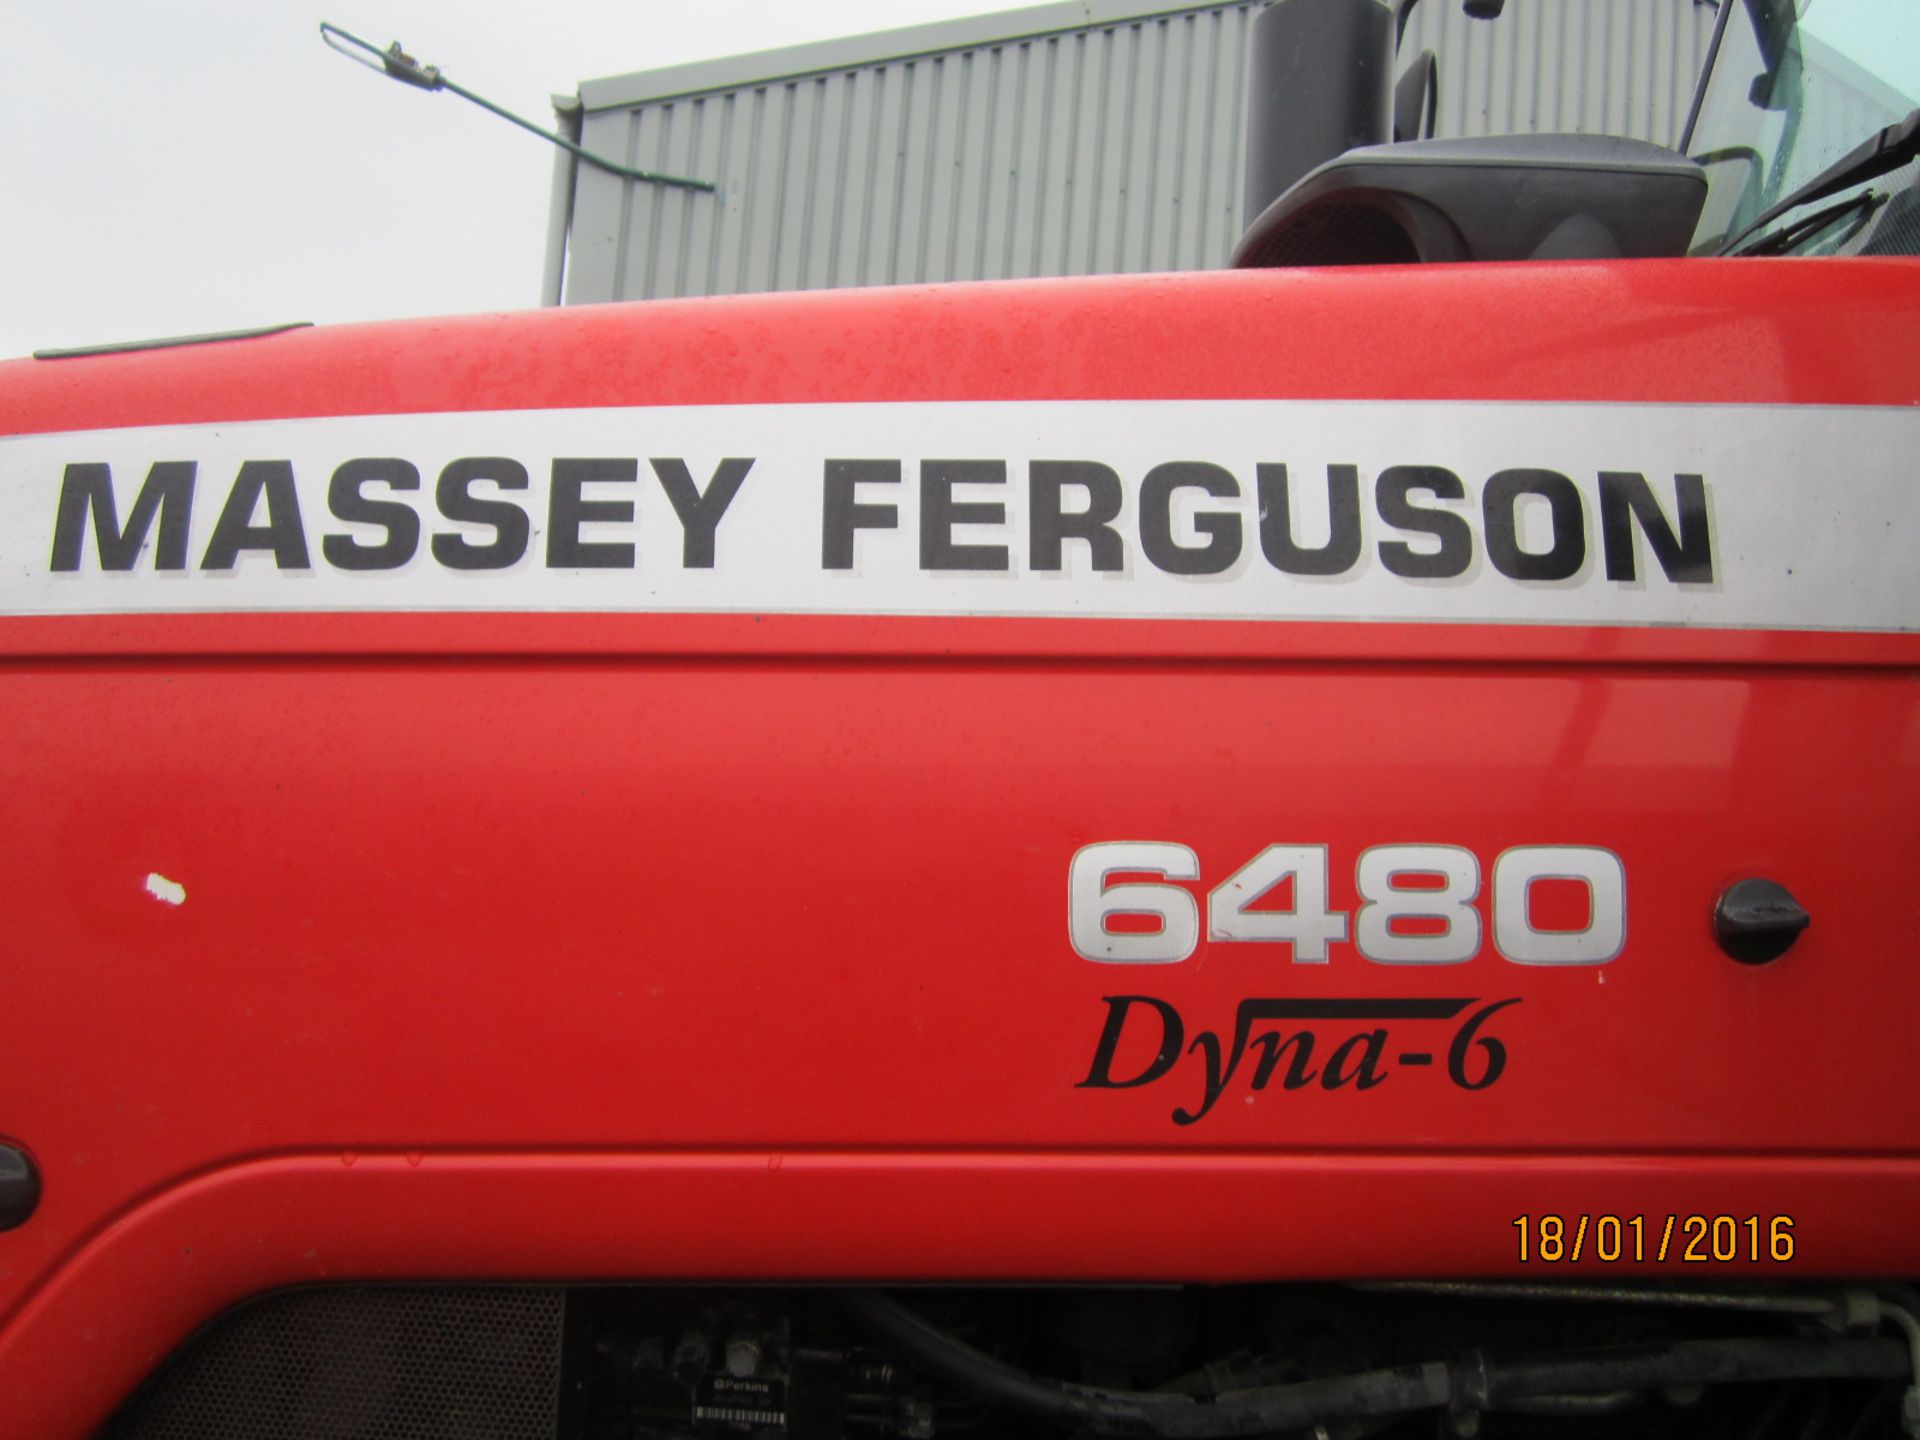 2006 Massey Ferguson 6480 DYNA 6 4WD Tractor c/w 8,300 Hrs - Image 6 of 7